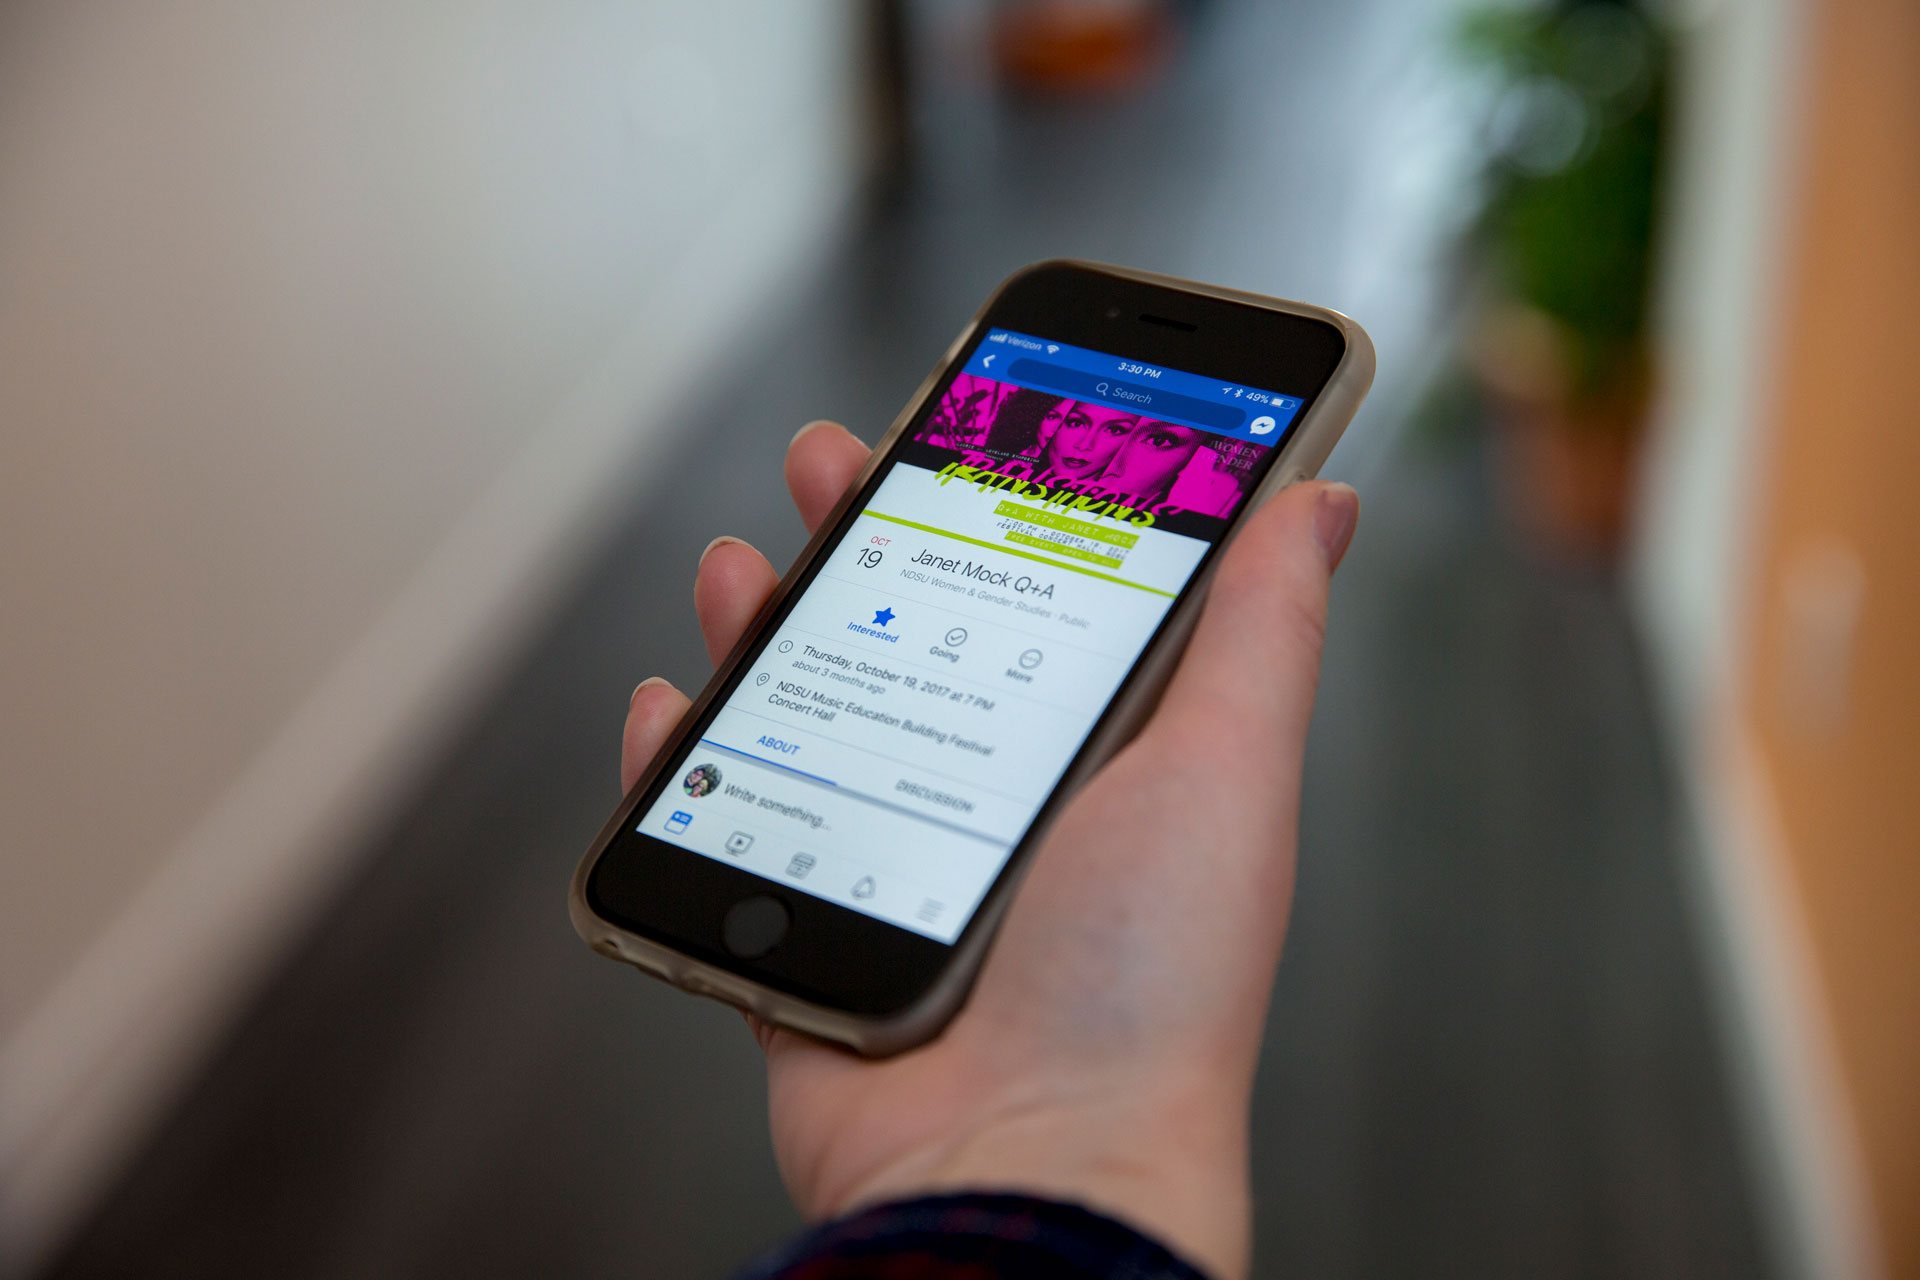 A hand holding an iPhone displaying a Facebook event with pink and green cover photo